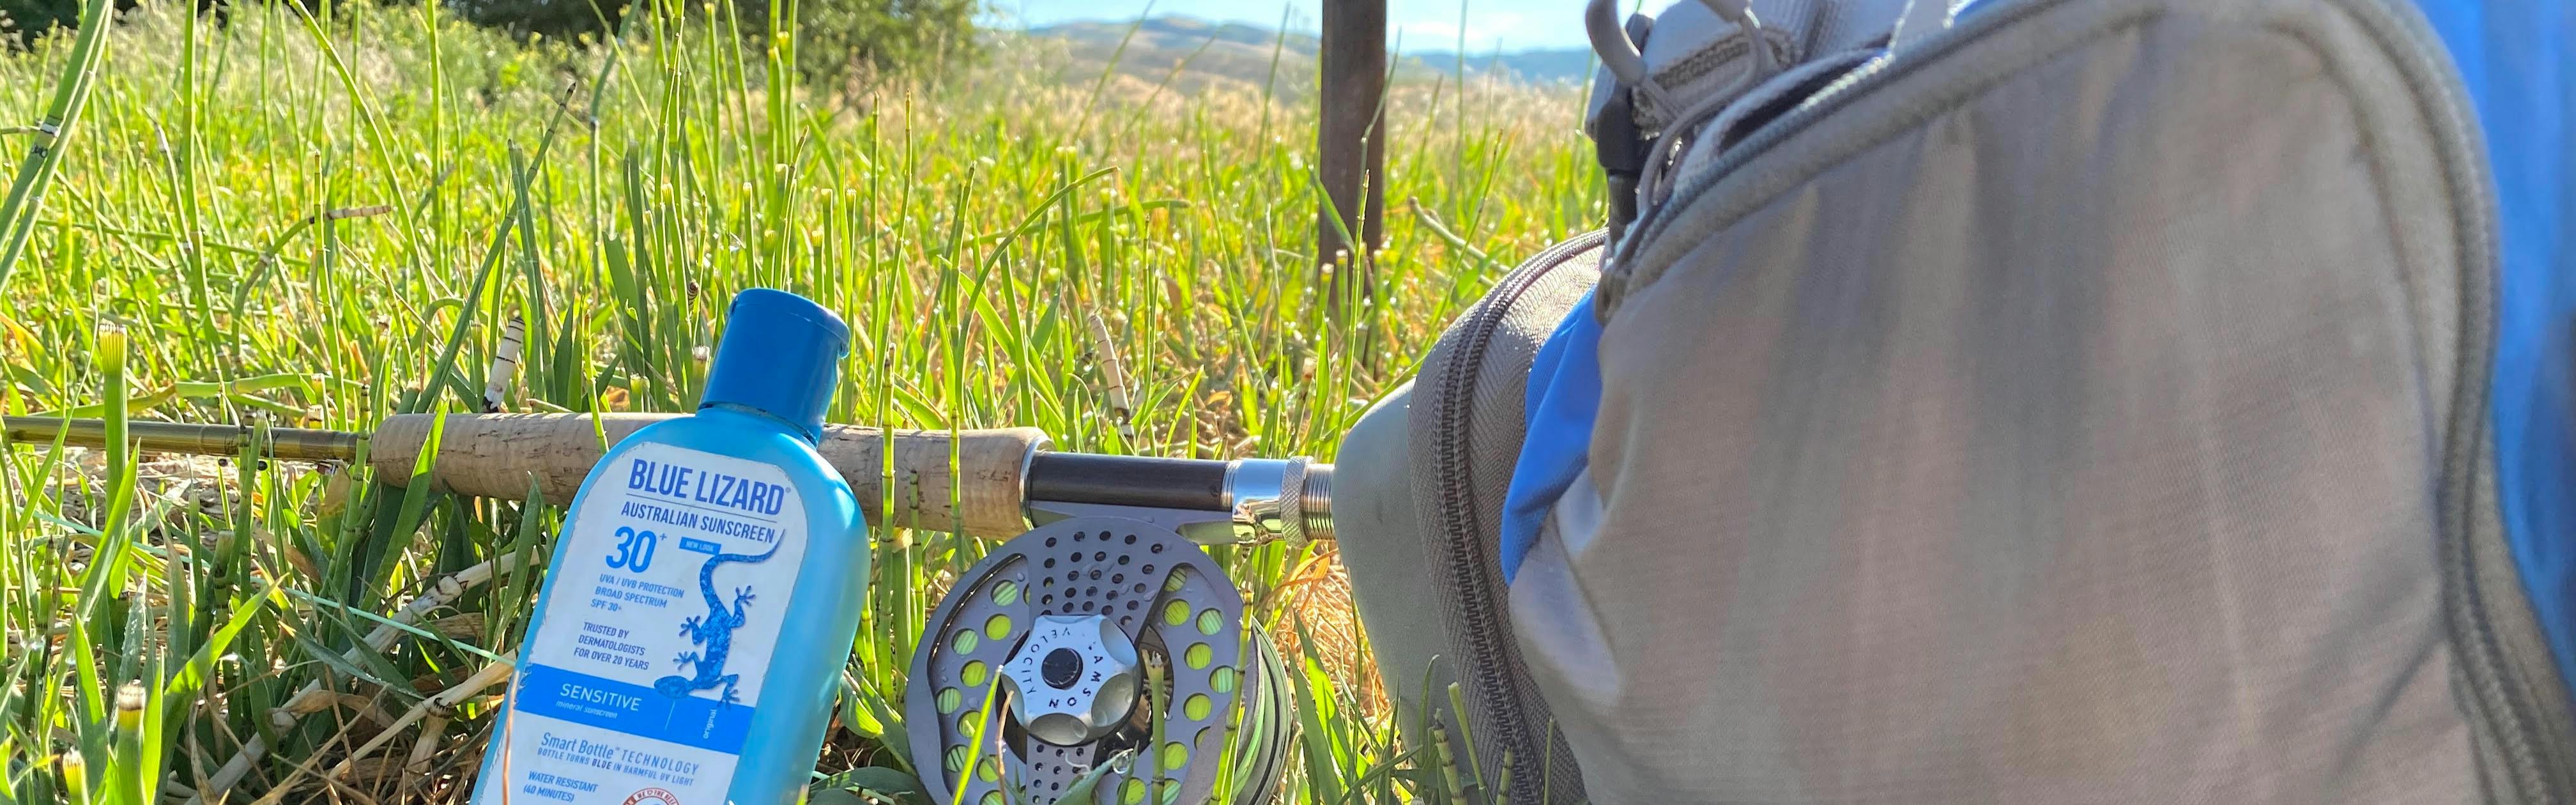 A fly fishing pack, sunscreen, and rod and reel laying in the grass